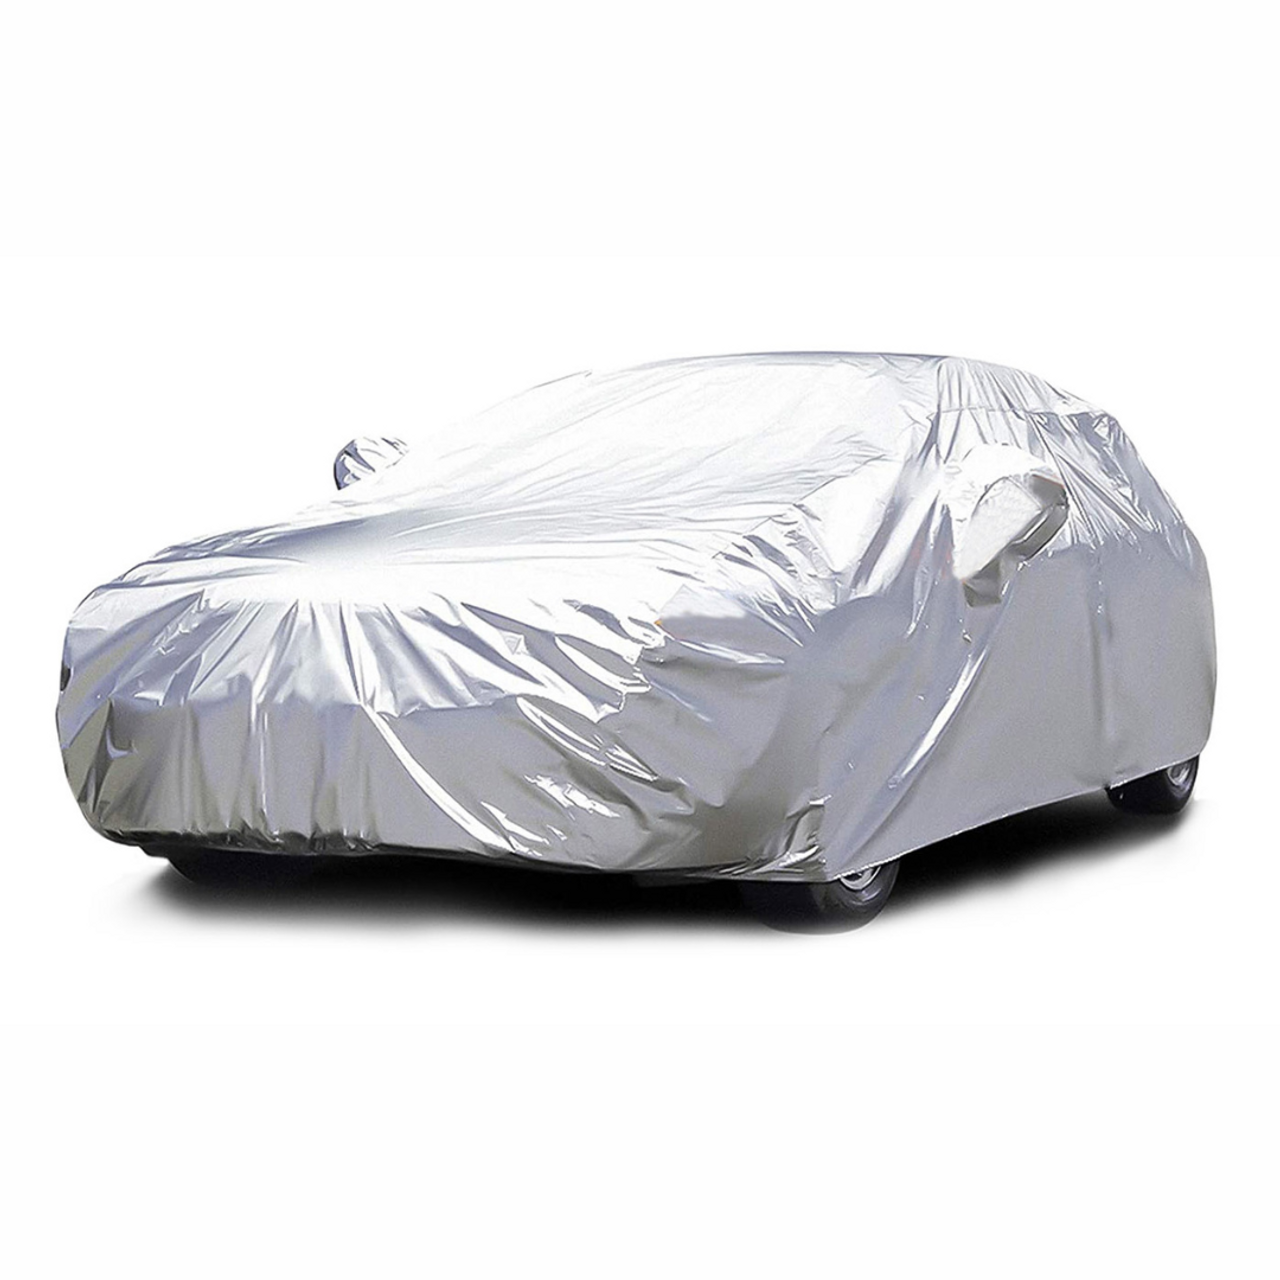 LakeForest® Full Car Cover UV Protection product image